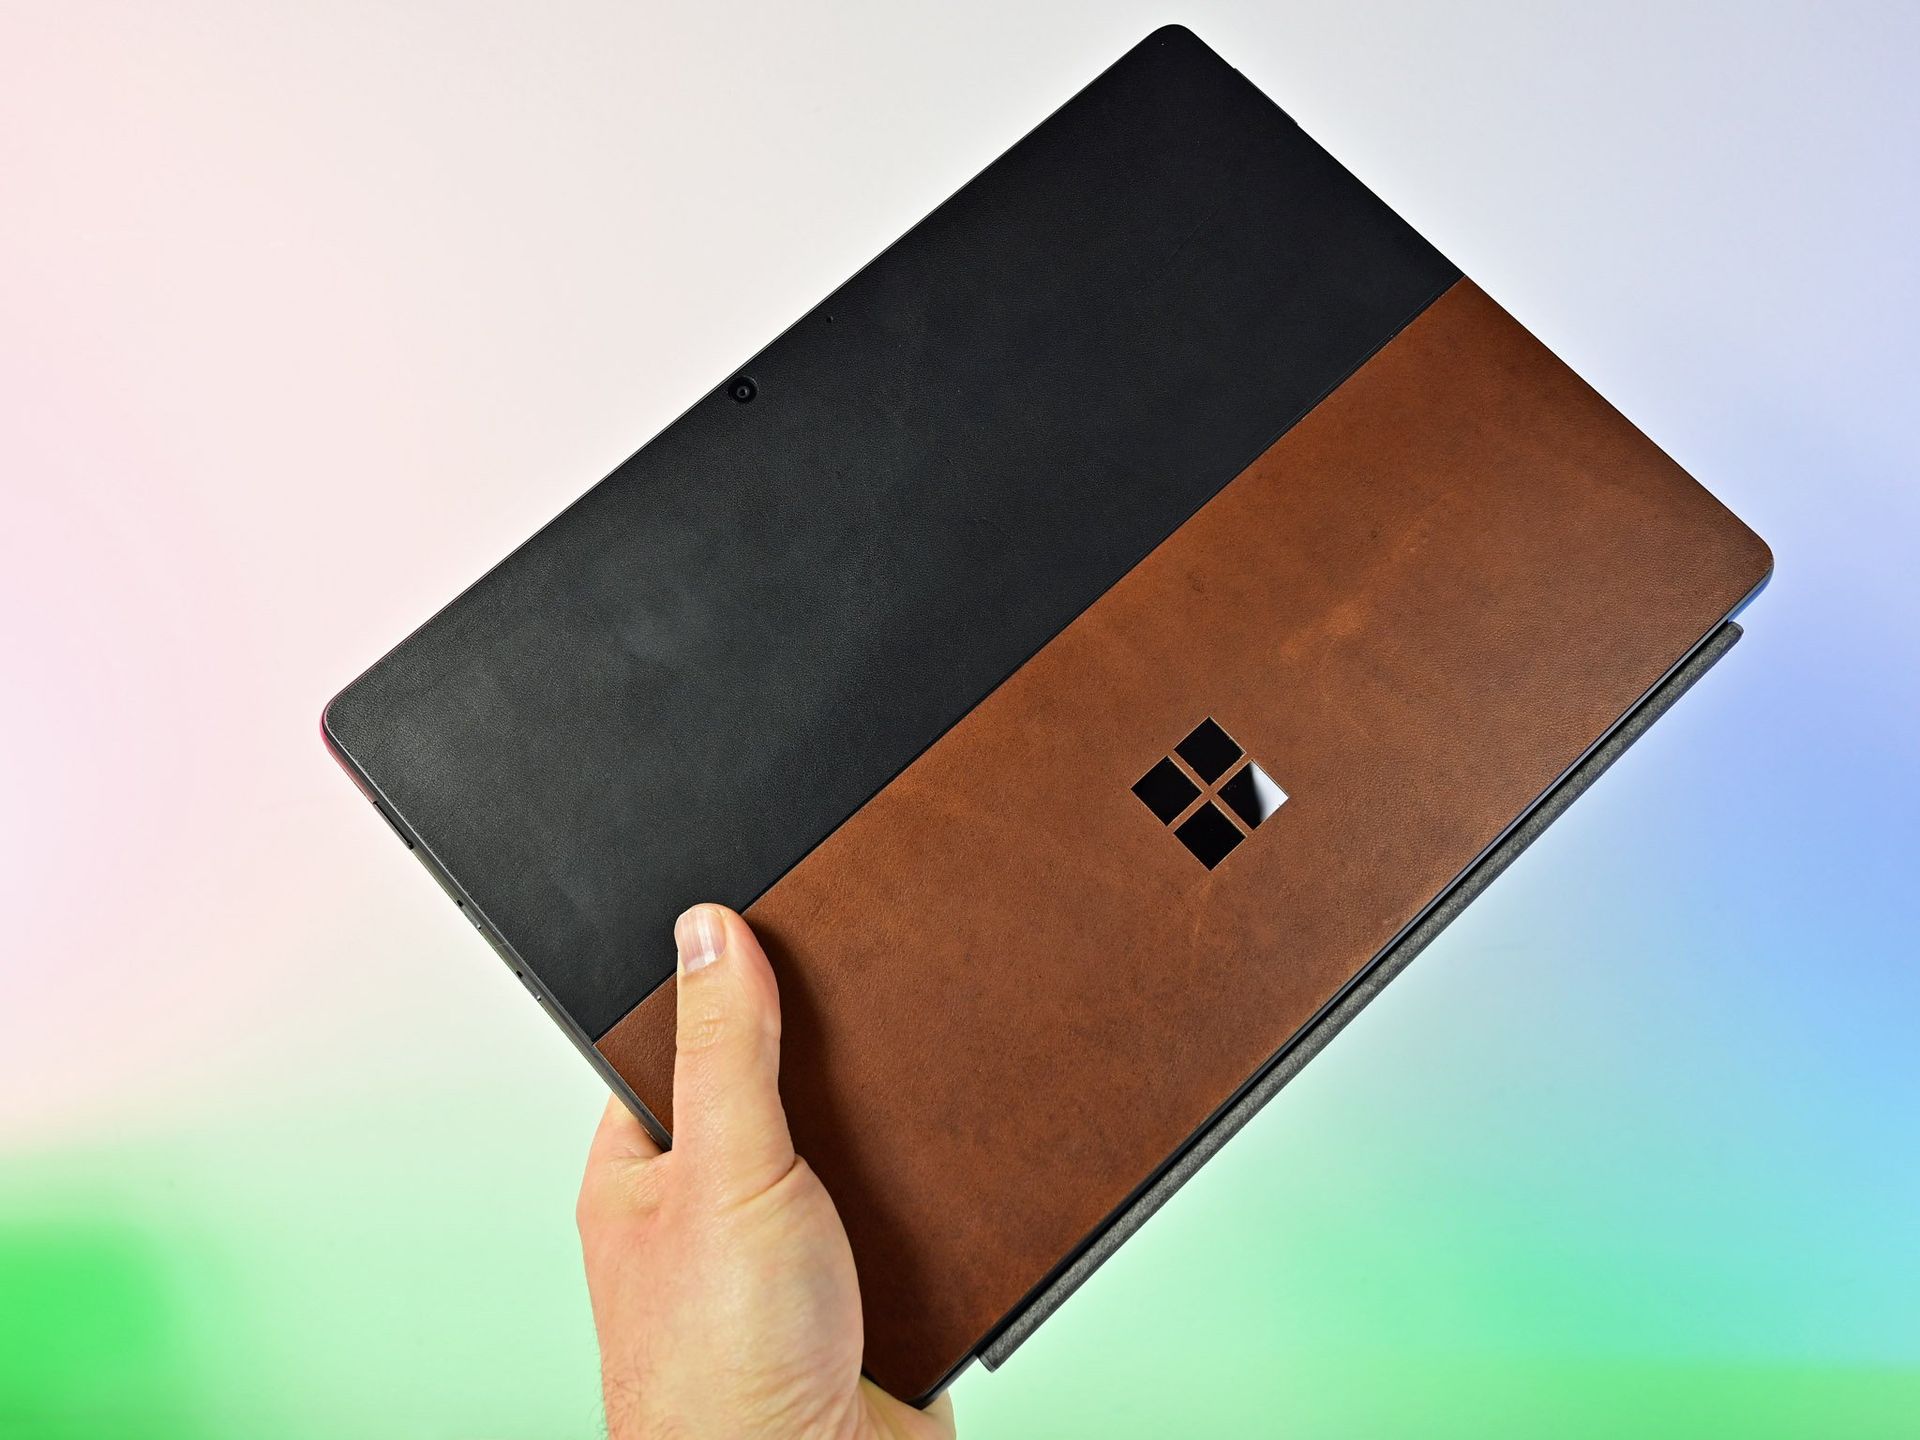 These Dbrand Limited Edition Real Leather Skins For Surface Pro Devices